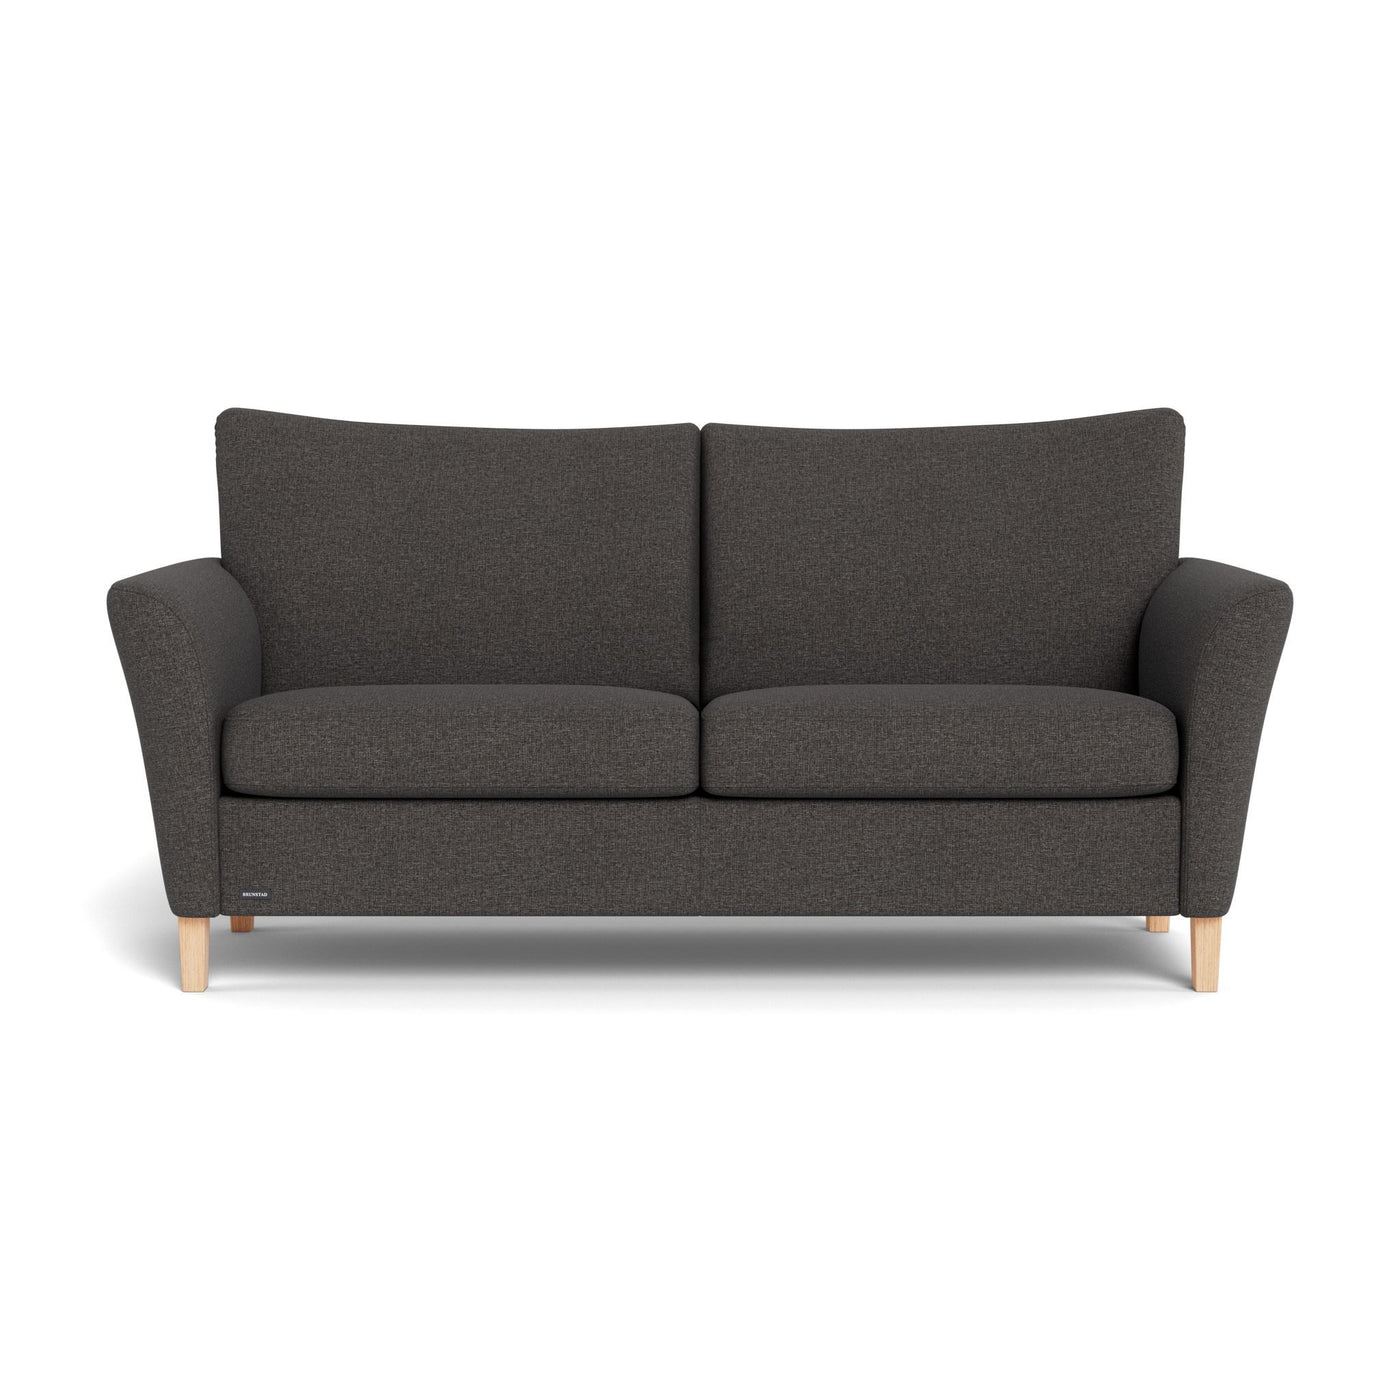 System+ | 3-personers sofa